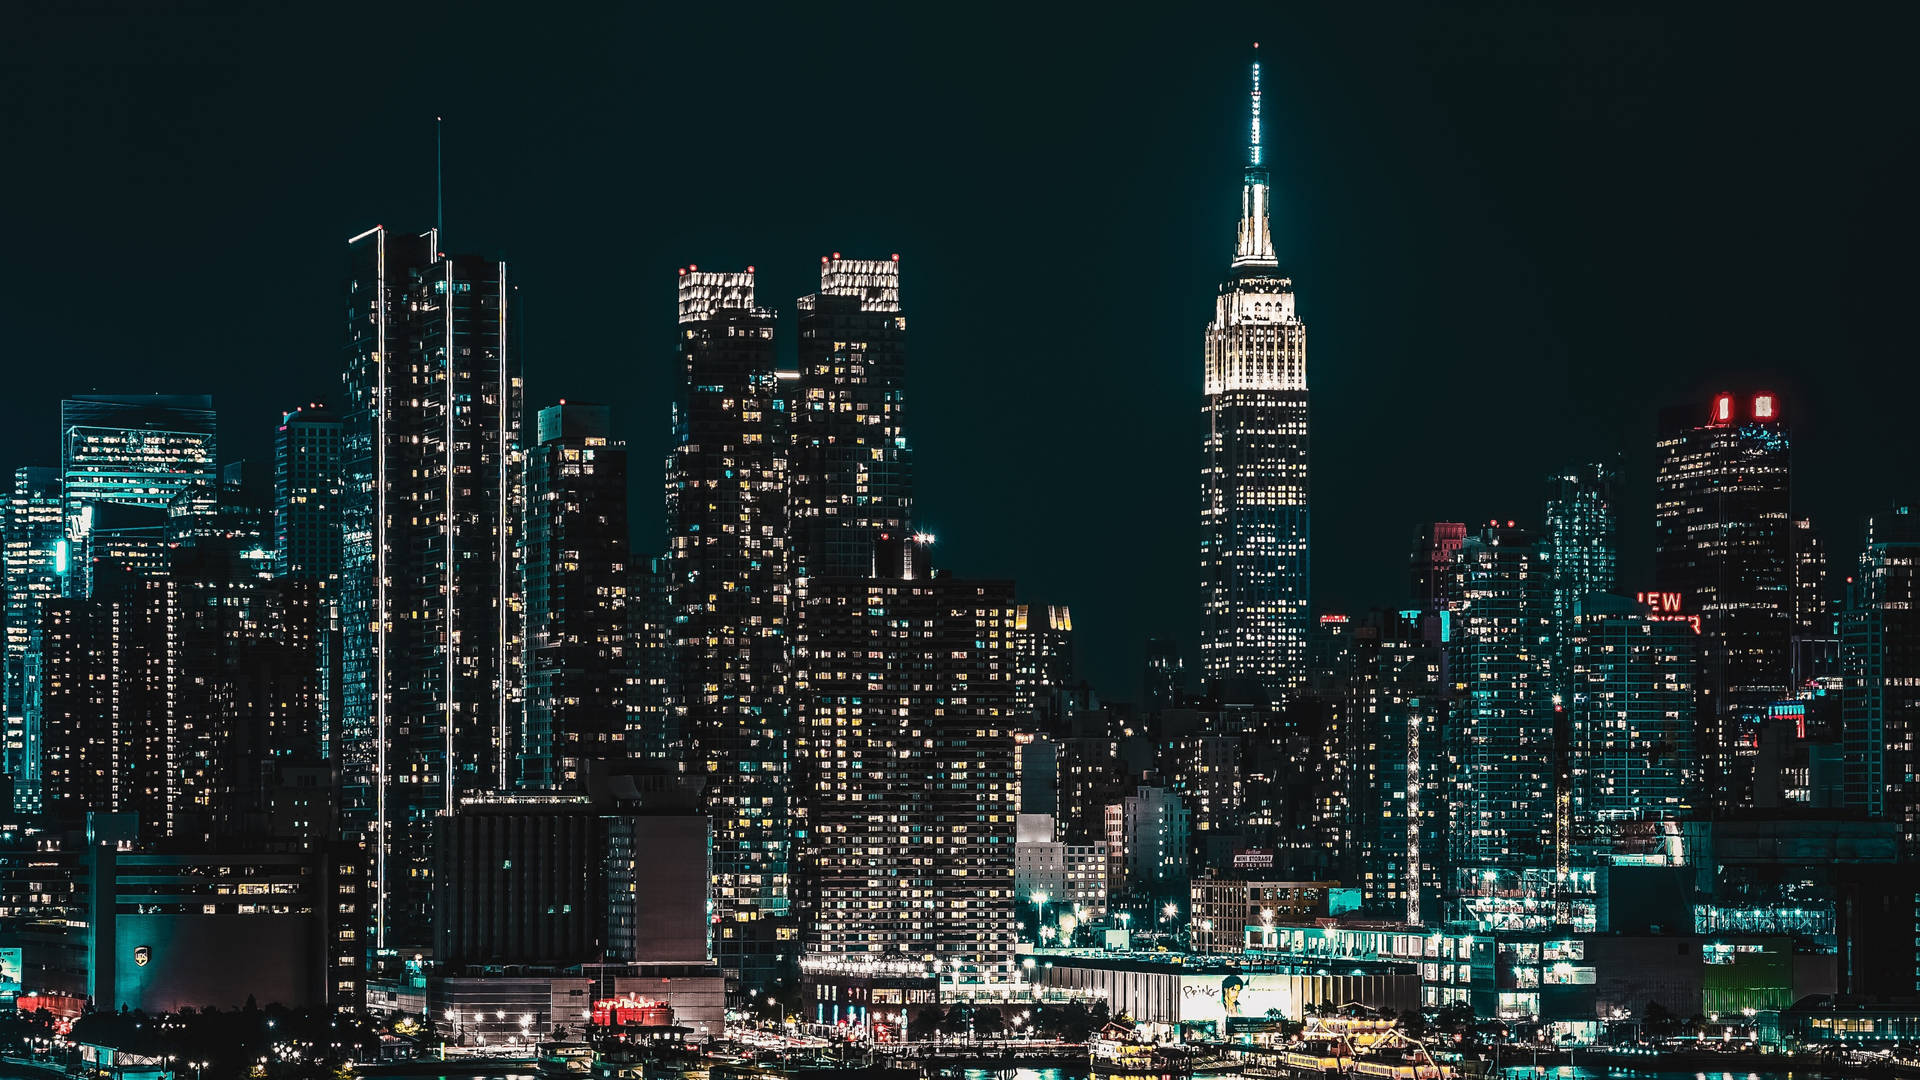 Top 999+ New York City Night Wallpapers Full HD, 4K✅Free to Use